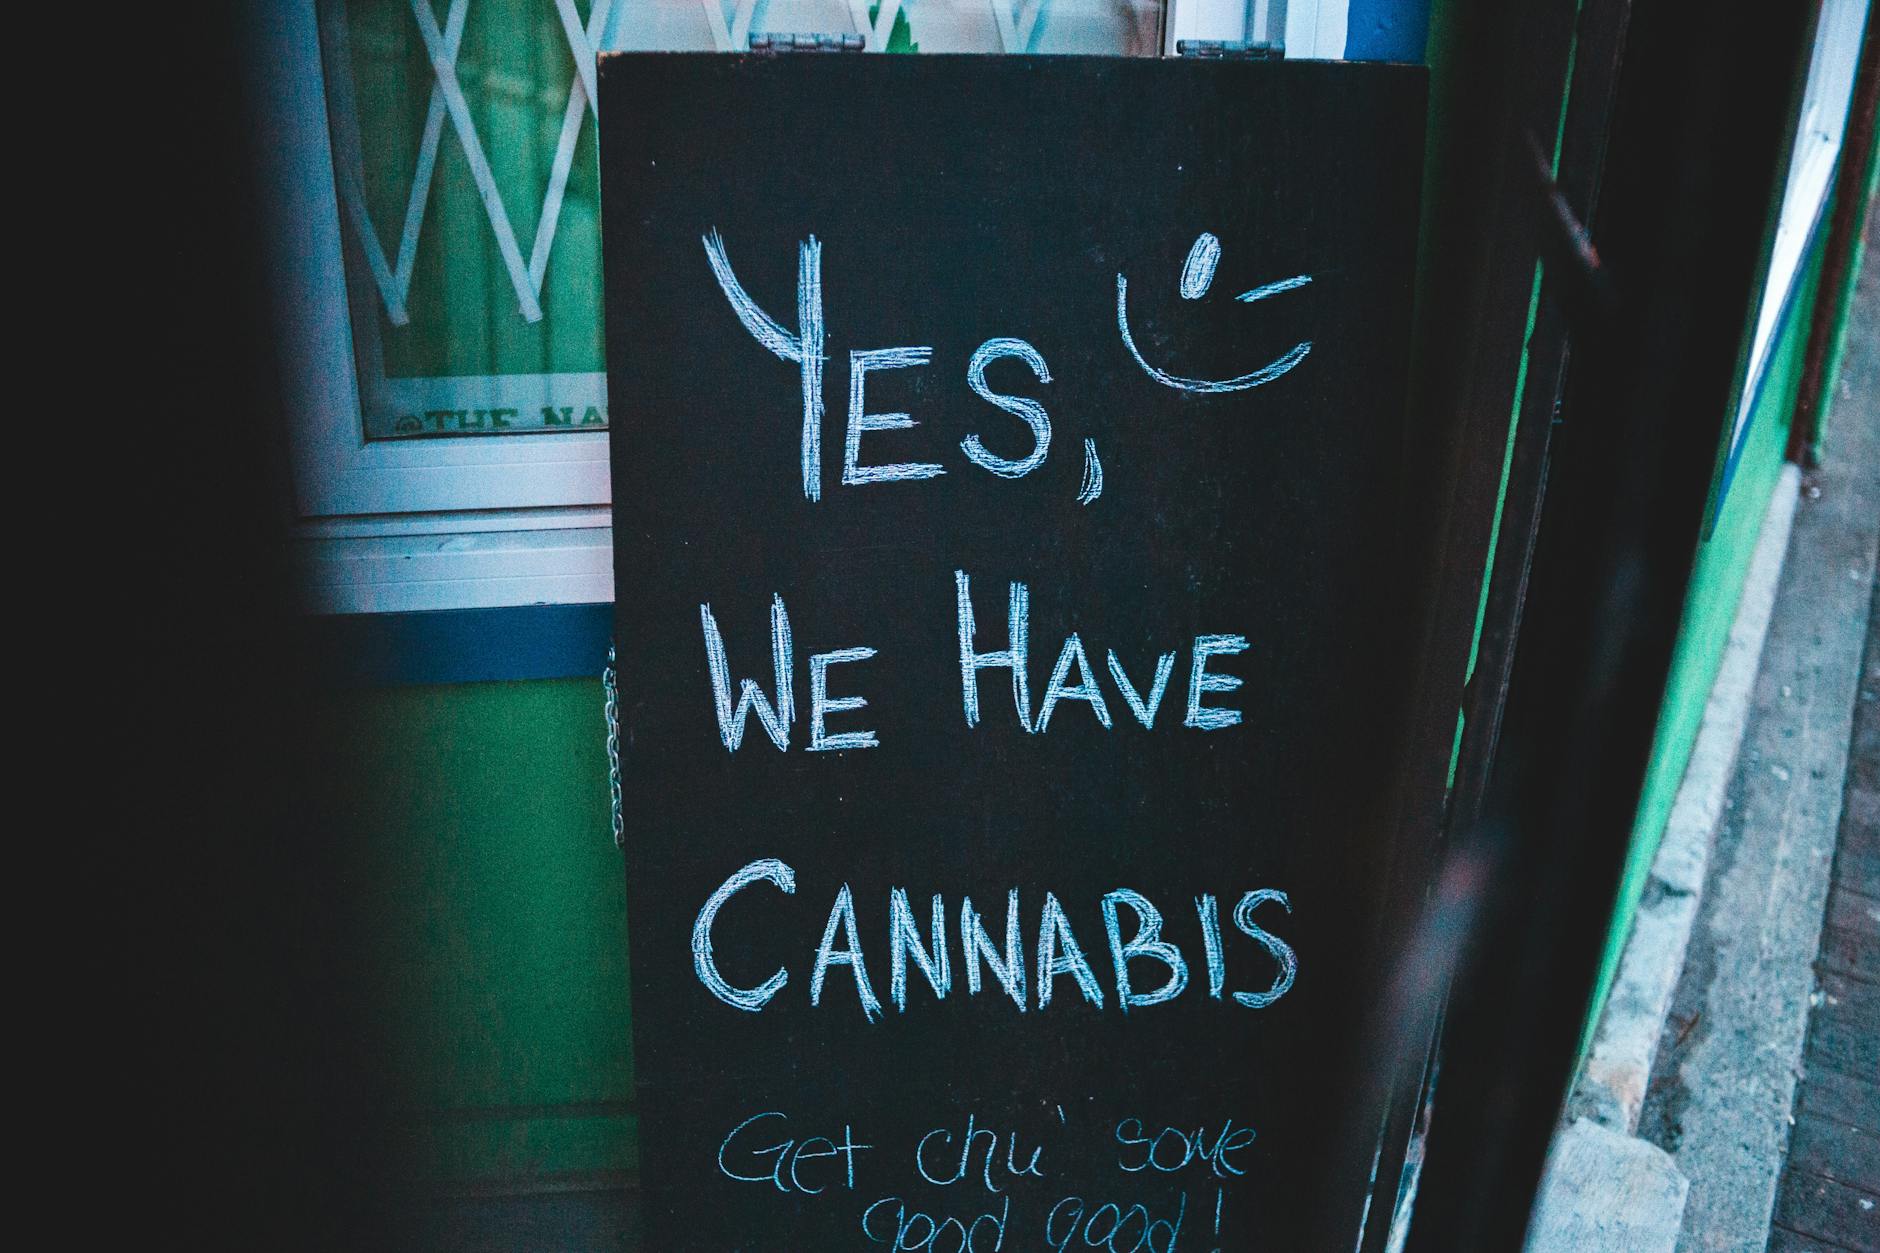 Lettering written on black chalkboard with cannabis offer near house on street of city